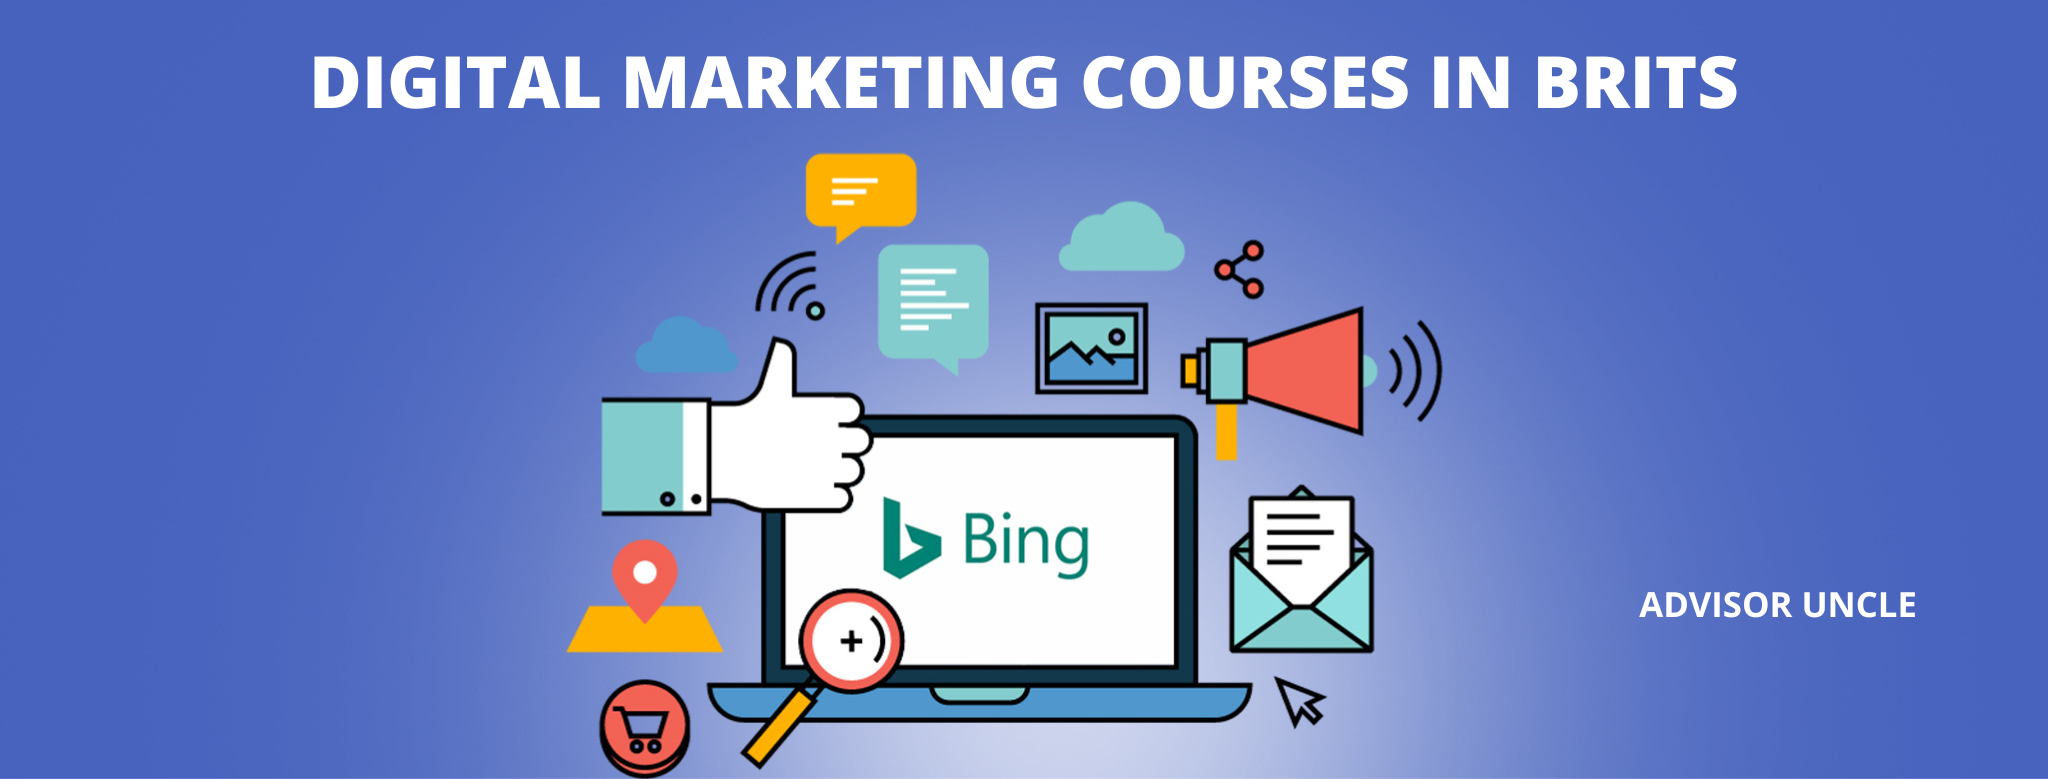 DIGITAL-MARKETING-COURSES-IN-BRITS.png